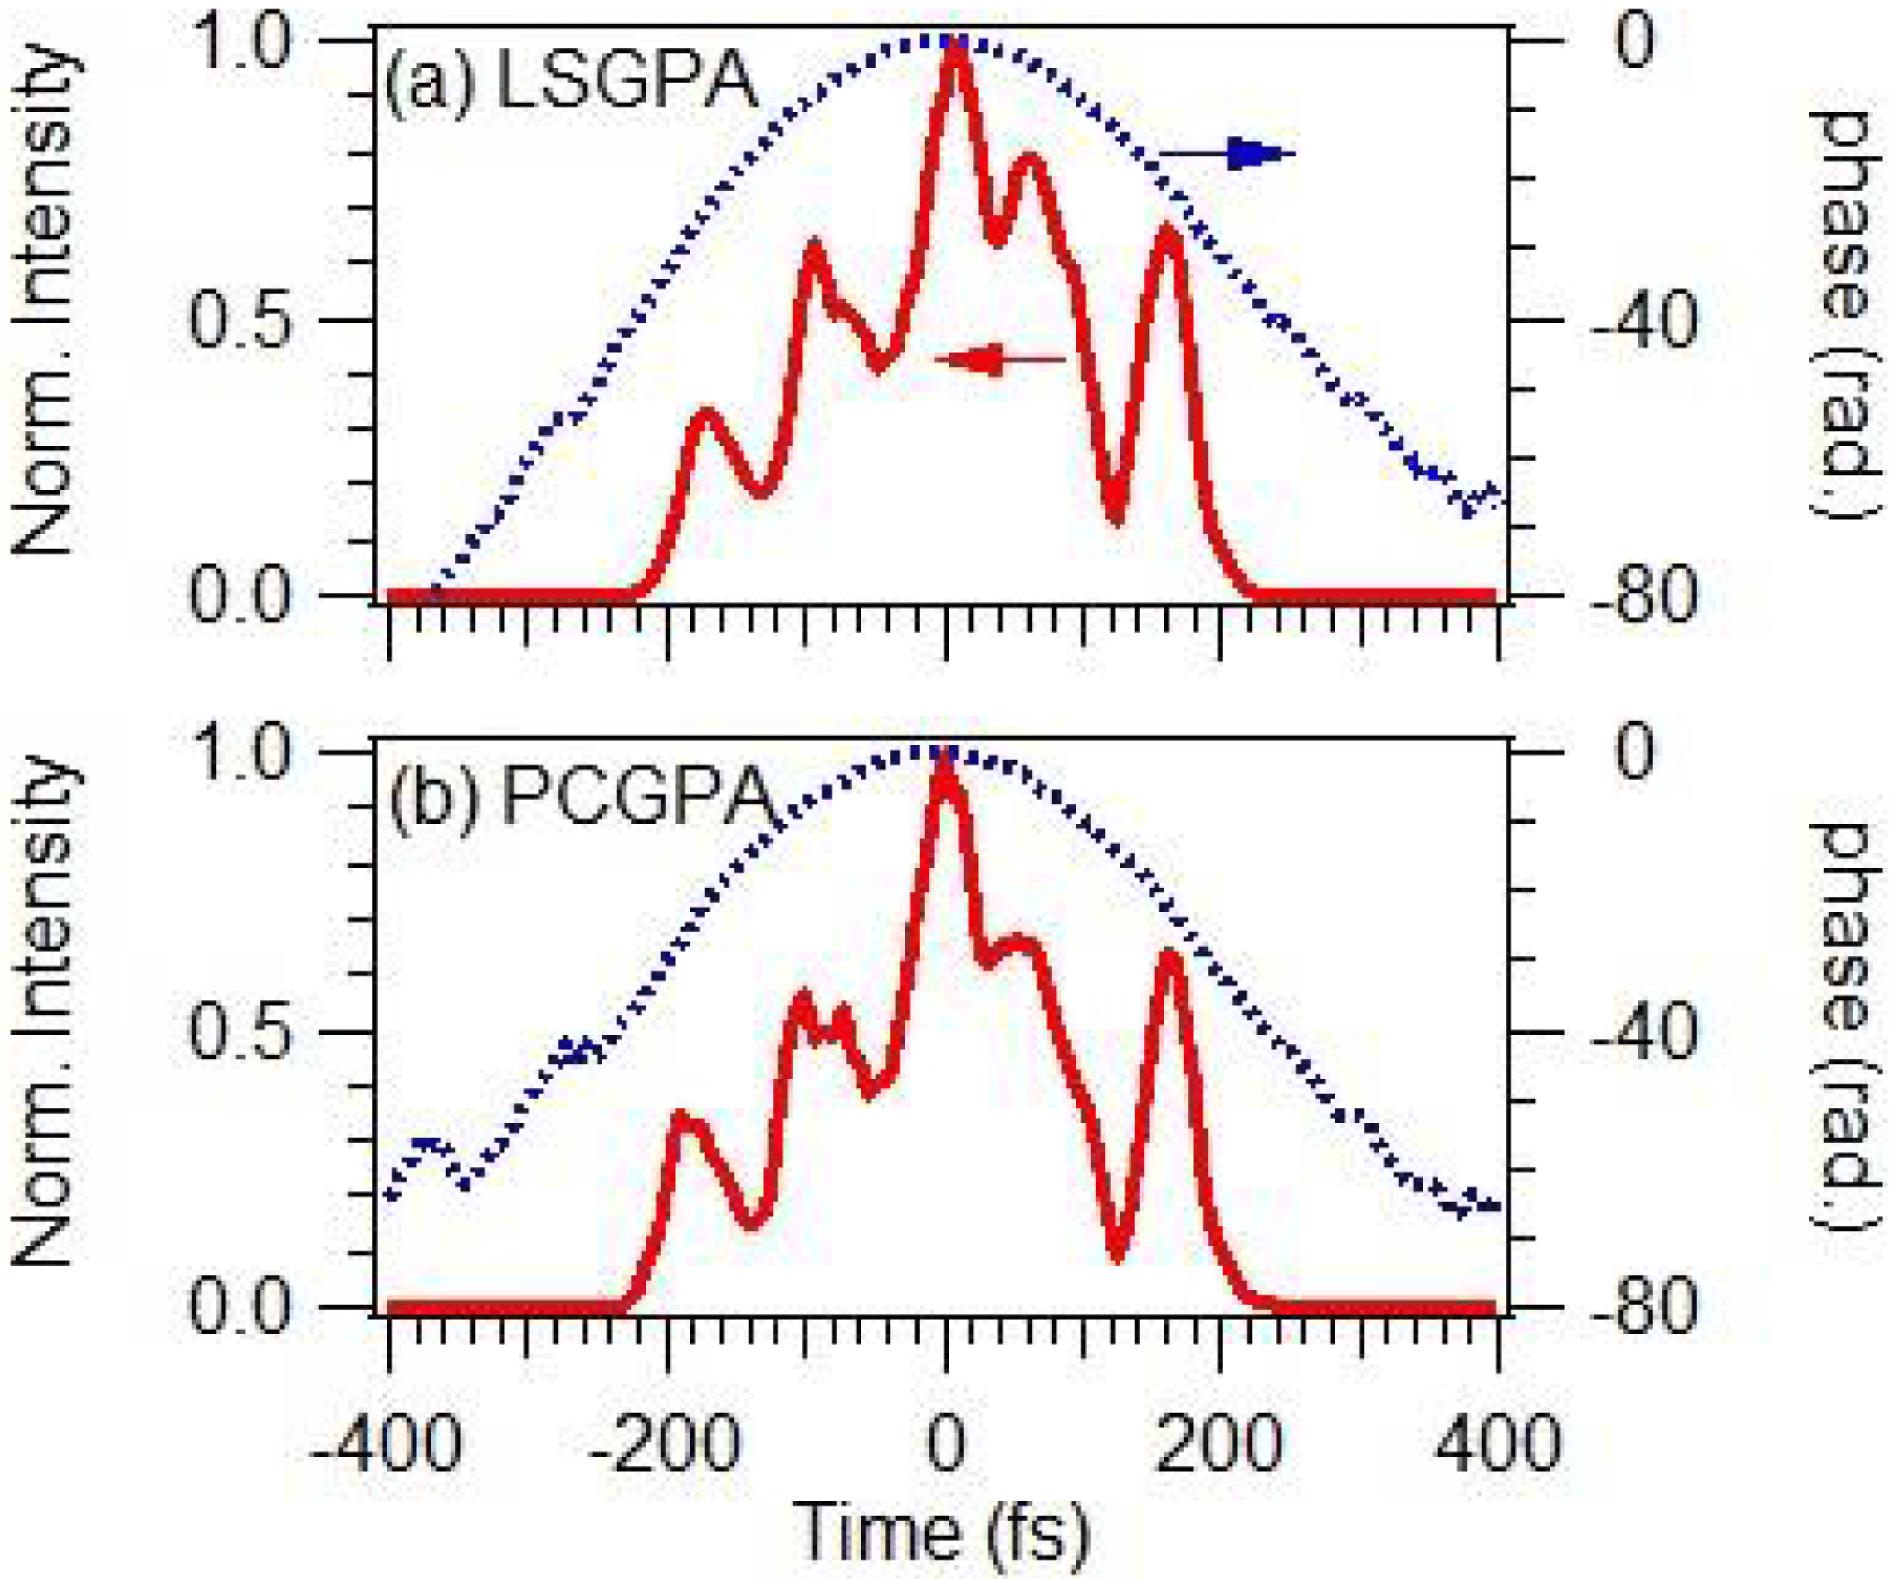 Temporal waveform of the VUV pulse extracted from the plasma-mirror FROG trace in Figure 1(a) by (a) the LSGPA and (b) the PCGPA. The solid and dotted lines indicate the intensity and relative phase, respectively. The intensity is normalized at the maximum.